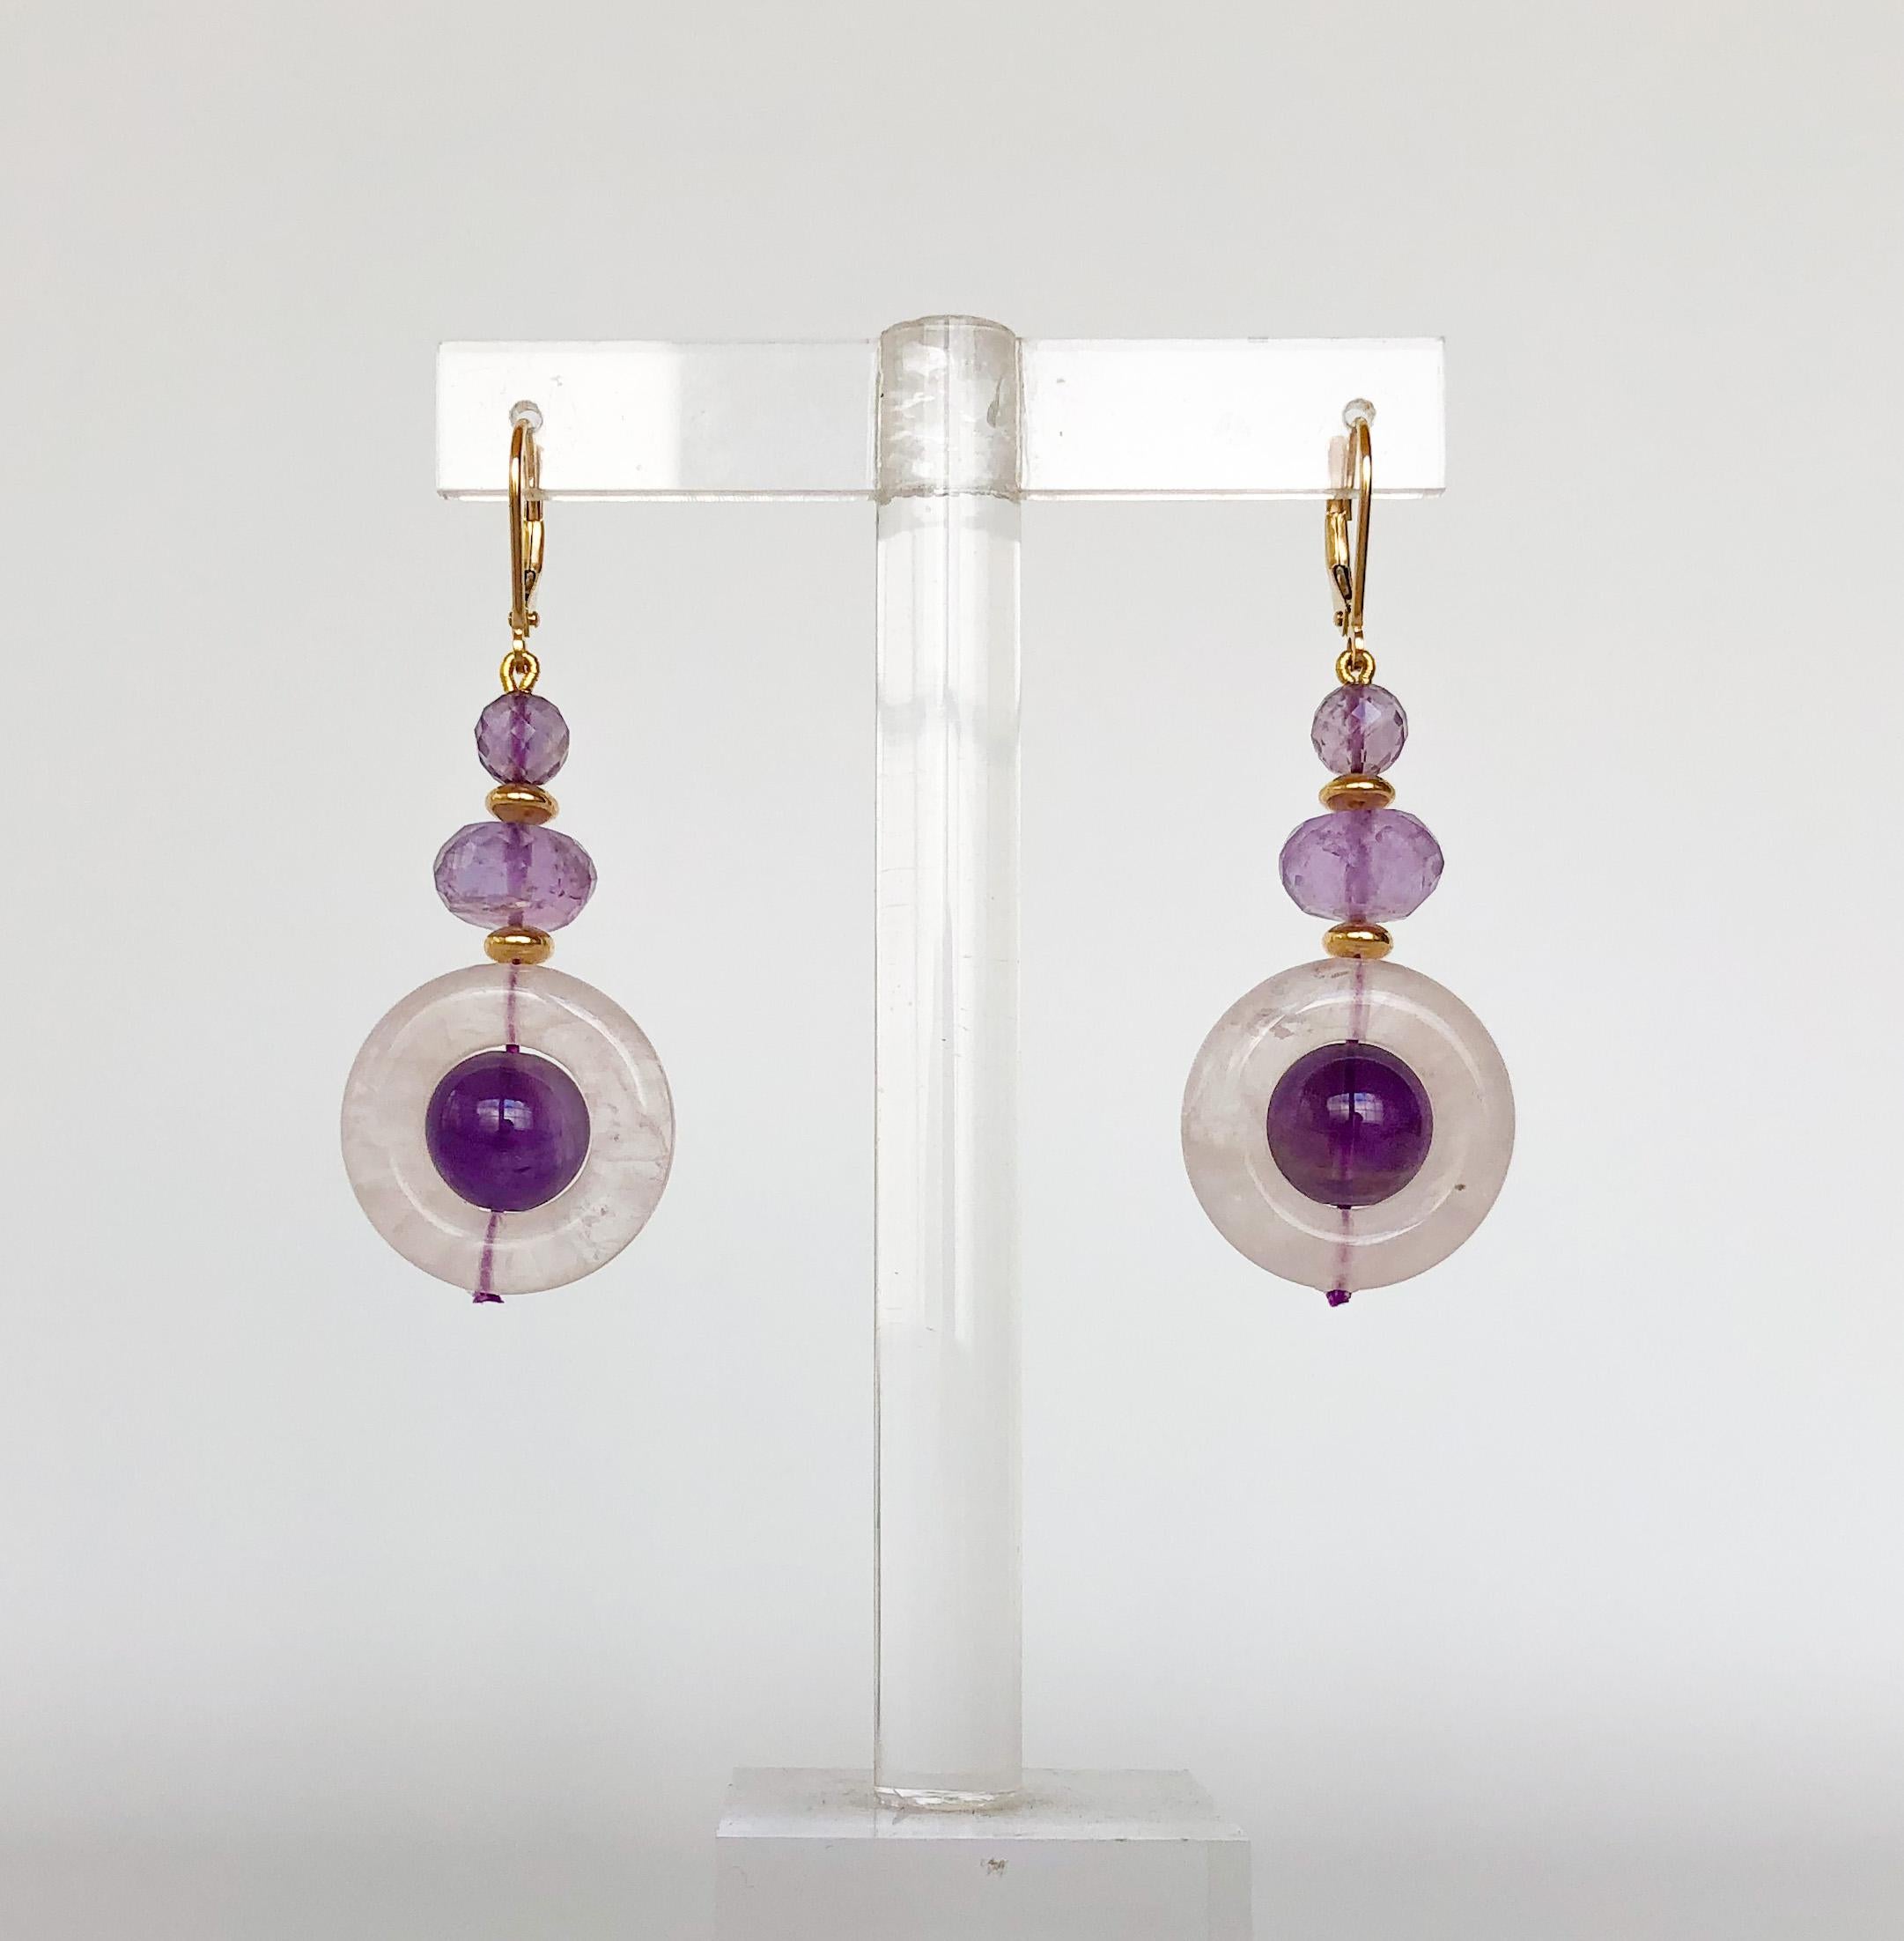 These earrings are made of amethyst beads and a rose quartz ring. There are also tiny gold beads in between the gems for a pop of color. The earrings are just about 2 inches long, and have sturdy 14k yellow gold lever-backs. This piece is part of